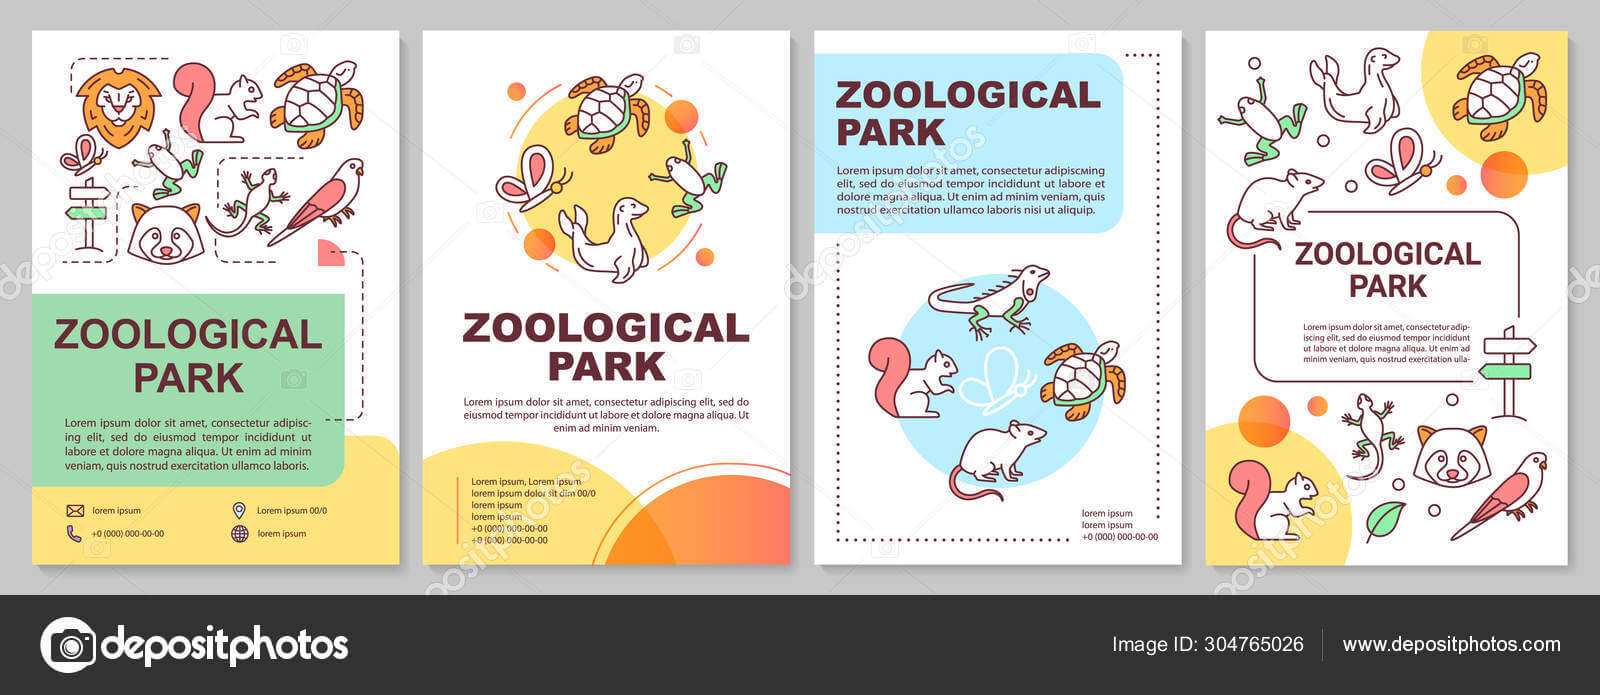 Zoological Park Brochure Template Layout. Zoo Animals. Flyer Pertaining To Zoo Brochure Template